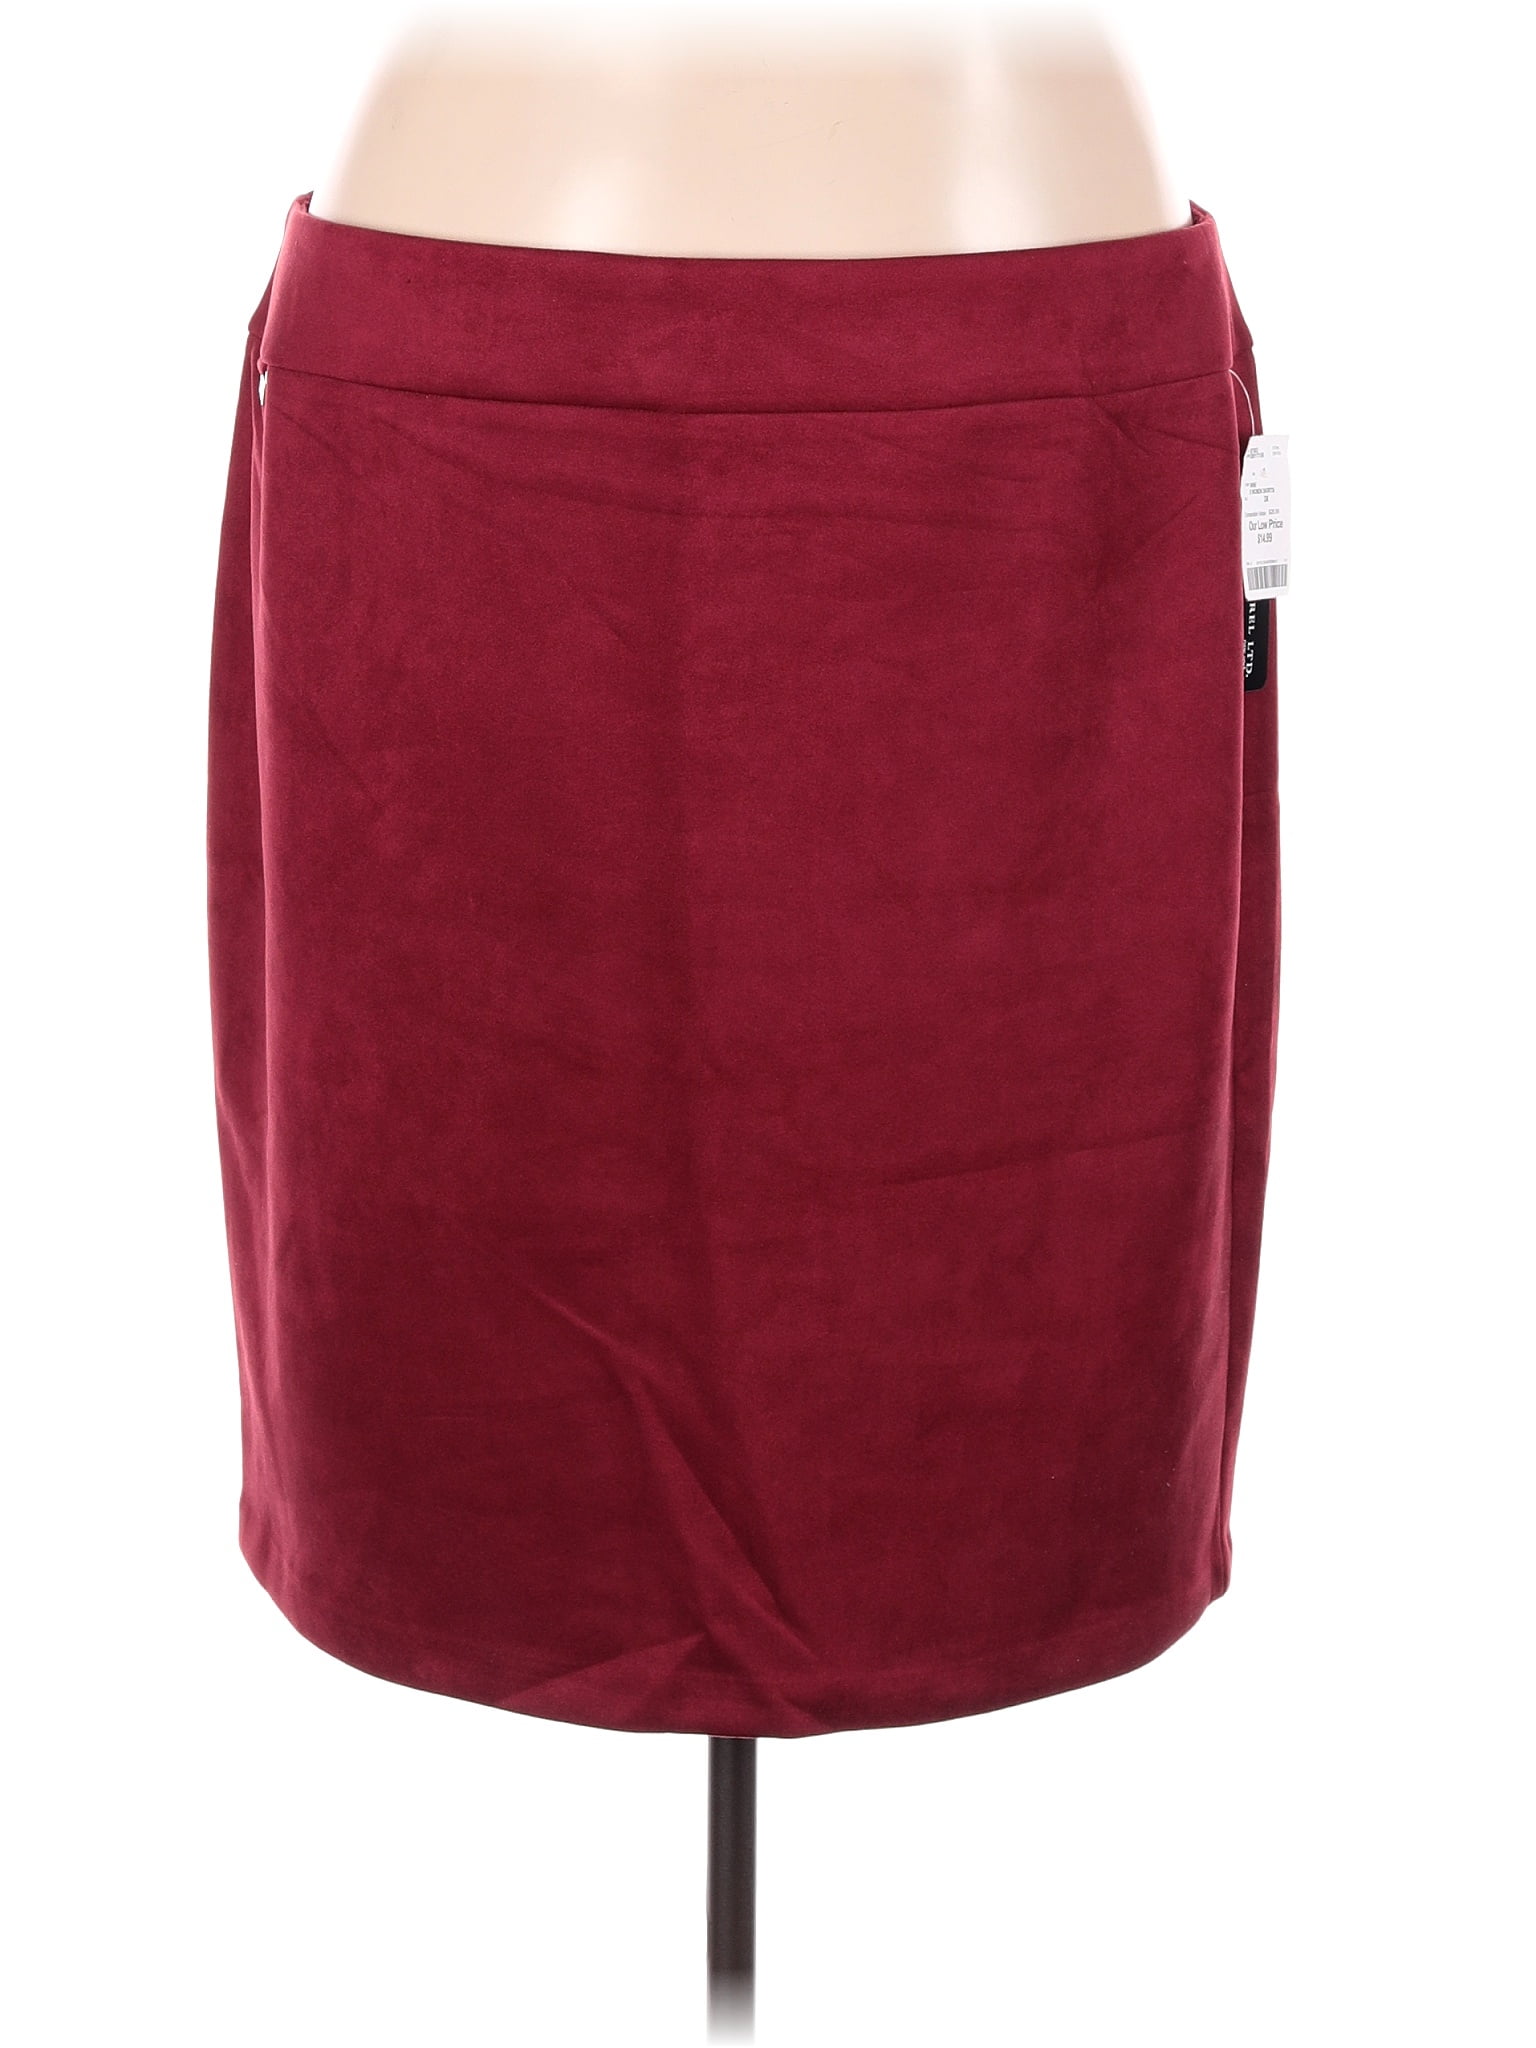 Soho Solid Maroon Burgundy Casual Skirt Size 3X (Plus) - 75% off